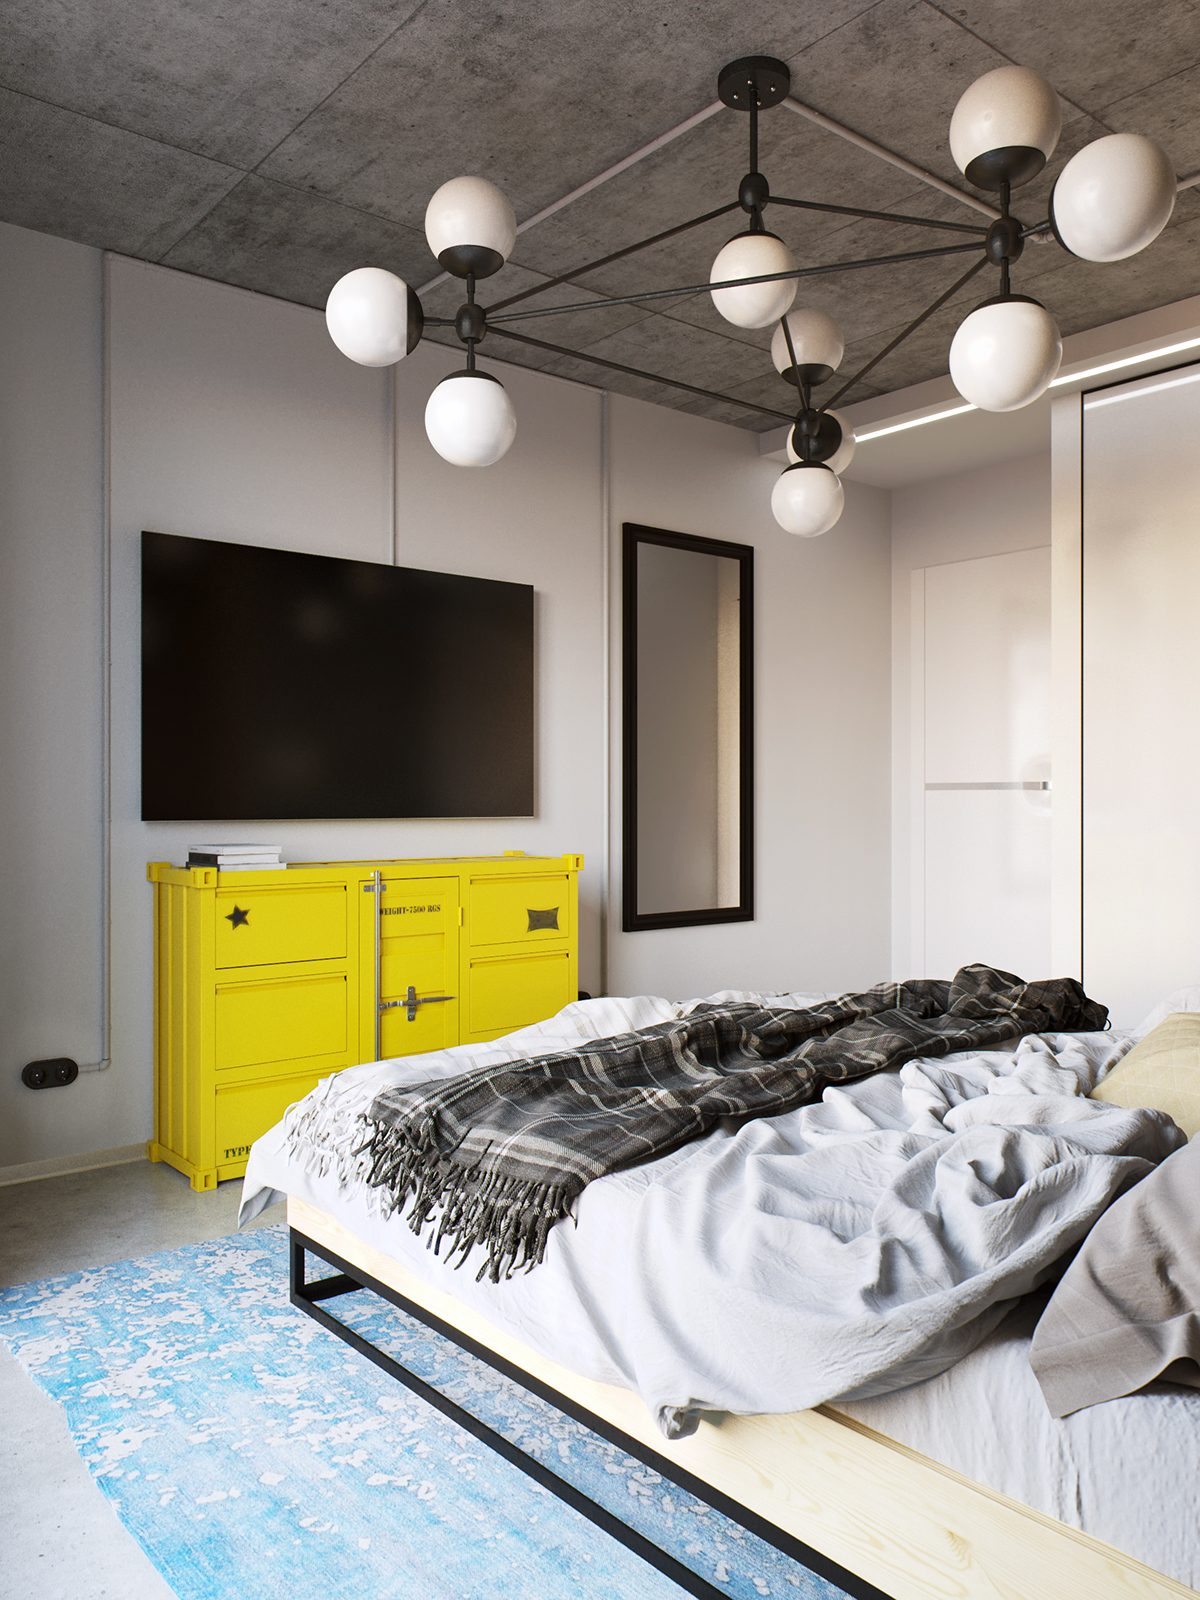 Modern bedroom decor "width =" 1200 "height =" 1600 "srcset =" https://mileray.com/wp-content/uploads/2020/05/1588510198_599_Stylish-and-Fashionable-Bedroom-Decorating-Ideas.jpg 1200w, https: / /mileray.com/wp-content/uploads/2016/07/yellow-and-blue-modern-bedroom-225x300.jpg 225w, https://mileray.com/wp-content/uploads/2016/07/yellow - and-blue-modern-bedroom-768x1024.jpg 768w, https://mileray.com/wp-content/uploads/2016/07/yellow-and-blue-modern-bedroom-696x928.jpg 696w, https: / / mileray.com/wp-content/uploads/2016/07/yellow-and-blue-modern-bedroom-1068x1424.jpg 1068w, https://mileray.com/wp-content/uploads/2016/07/yellow- and -blue-modern-bedroom-315x420.jpg 315w "sizes =" (maximum width: 1200px) 100vw, 1200px